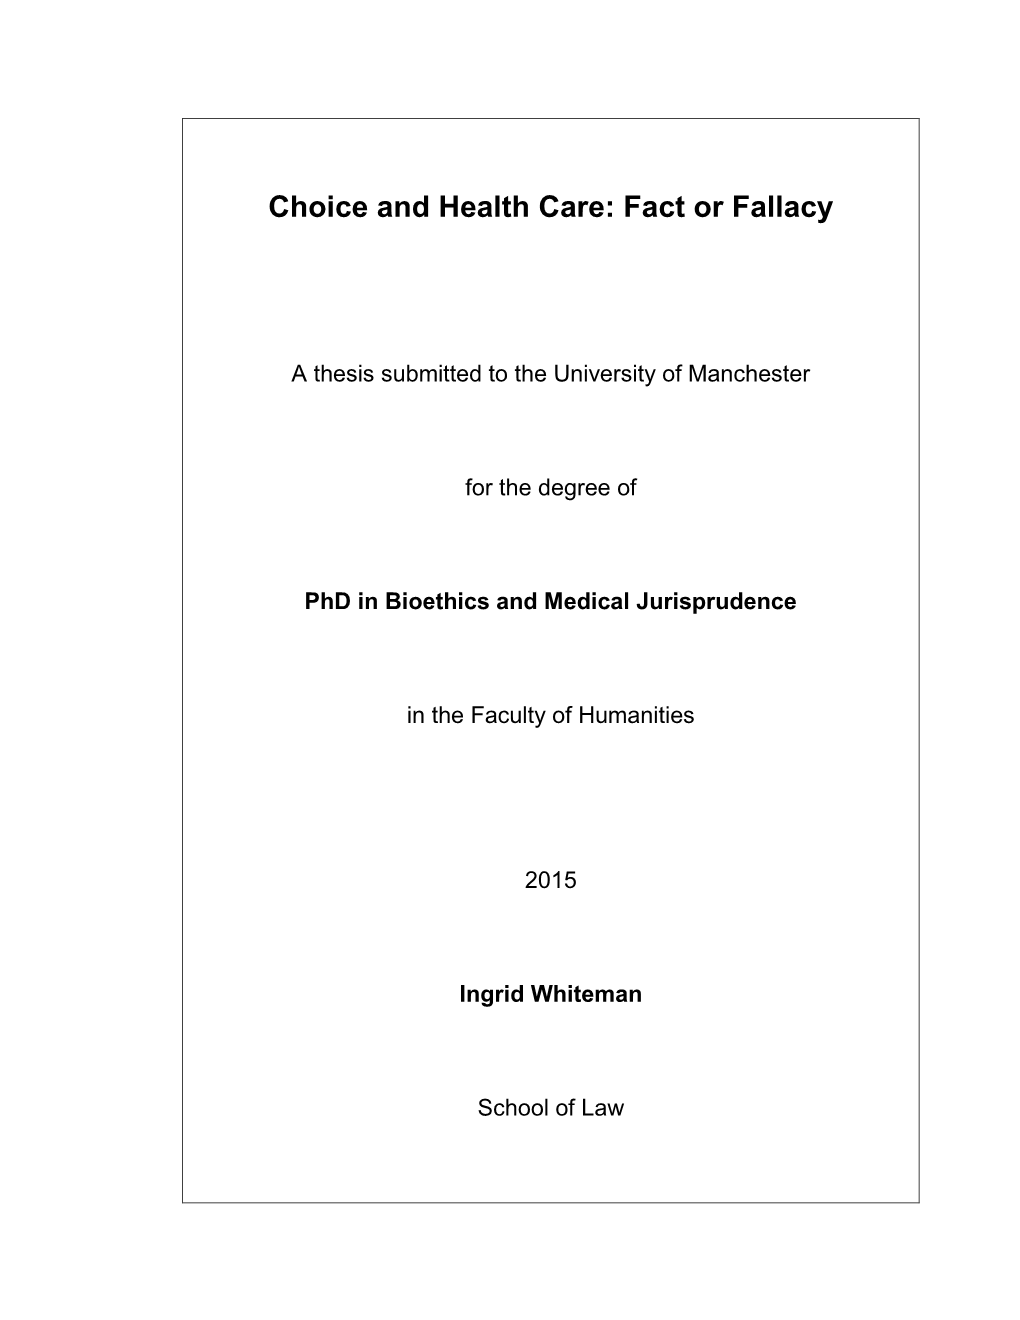 Choice and Health Care: Fact Or Fallacy